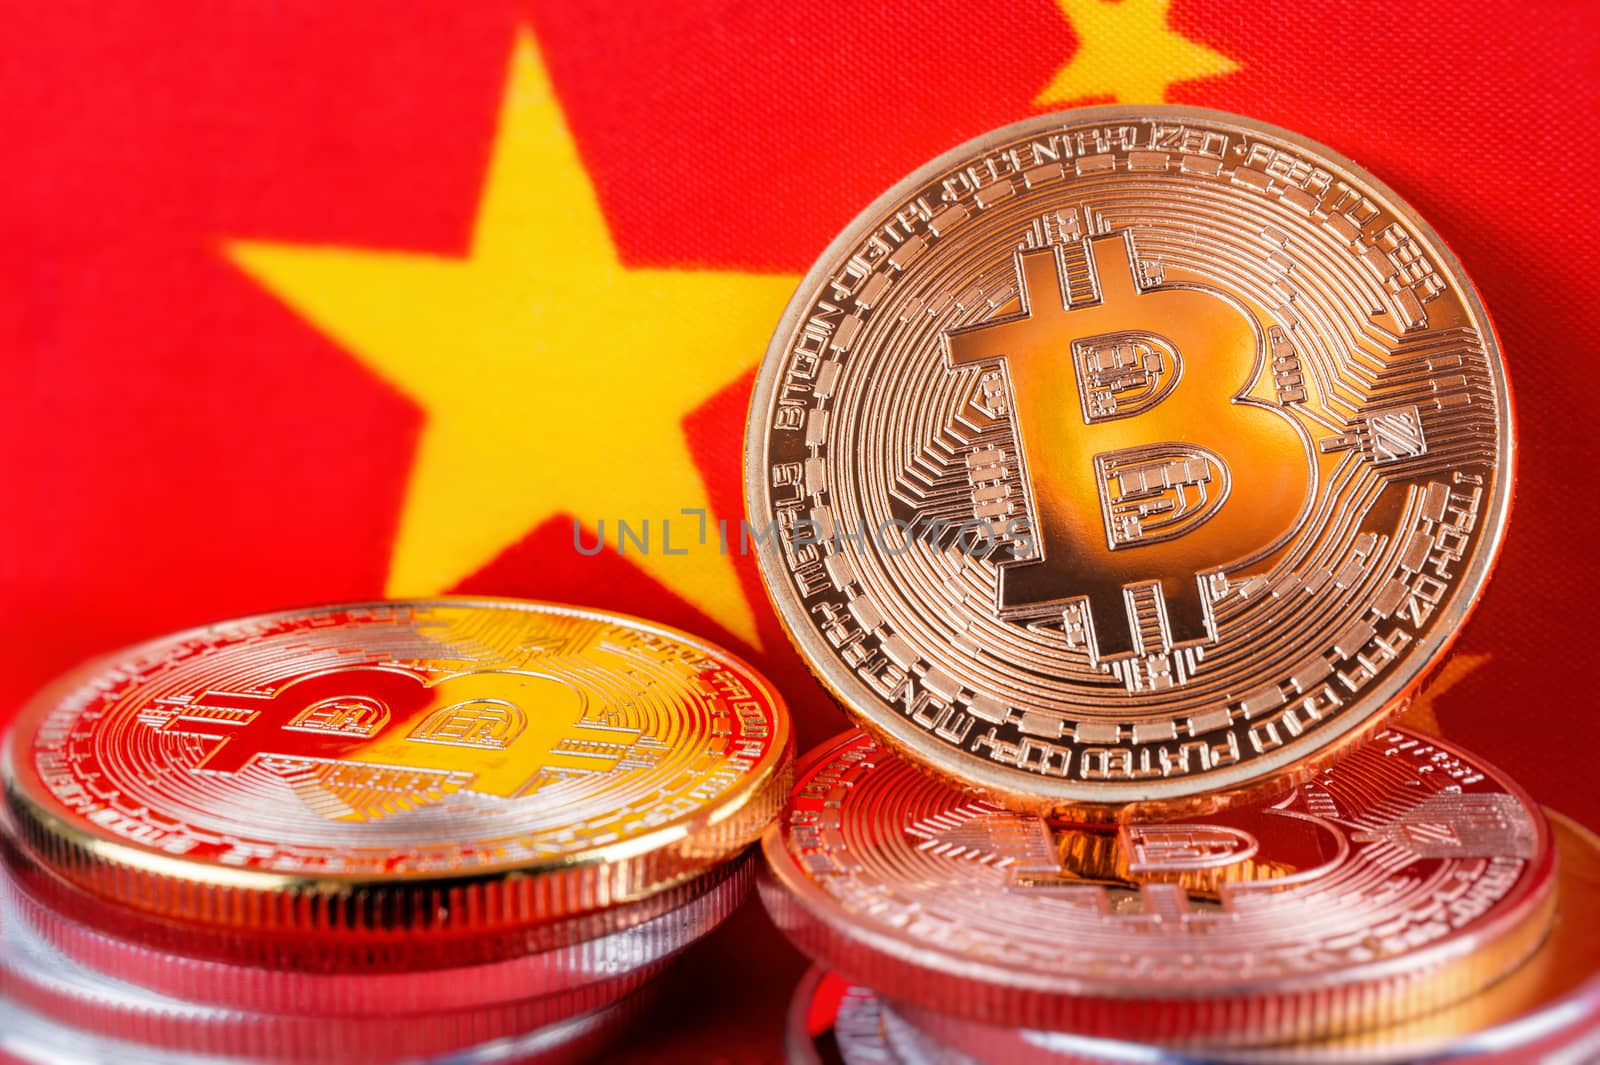 Bitcoin real coins over chinese flag fabric by mbruxelle